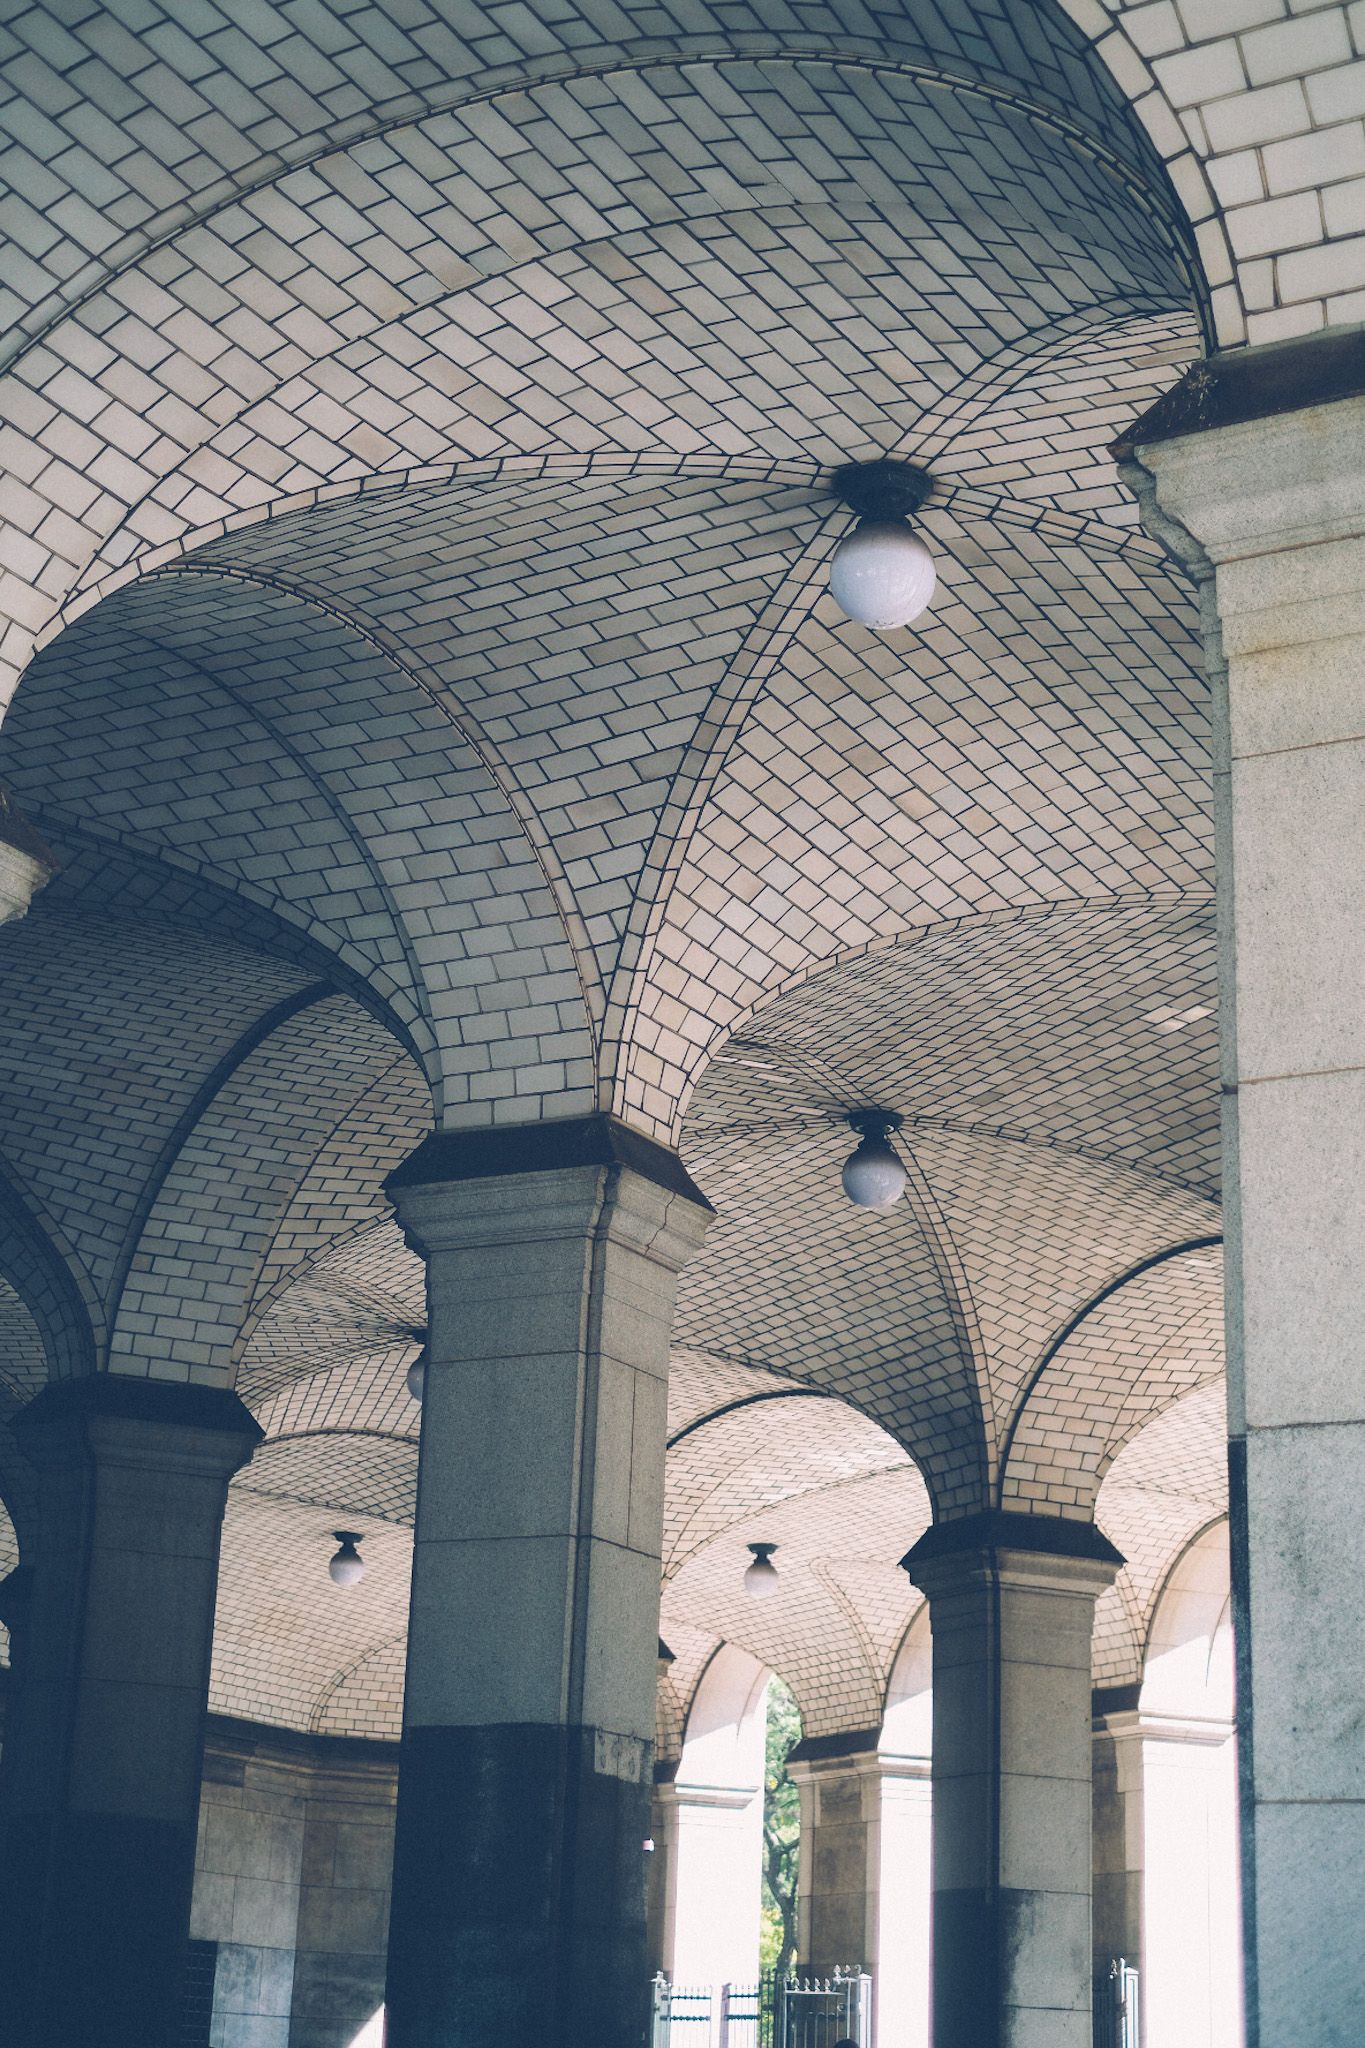 Pillars with white tile rise up to create archways, uniting as the ceiling of a subway station.